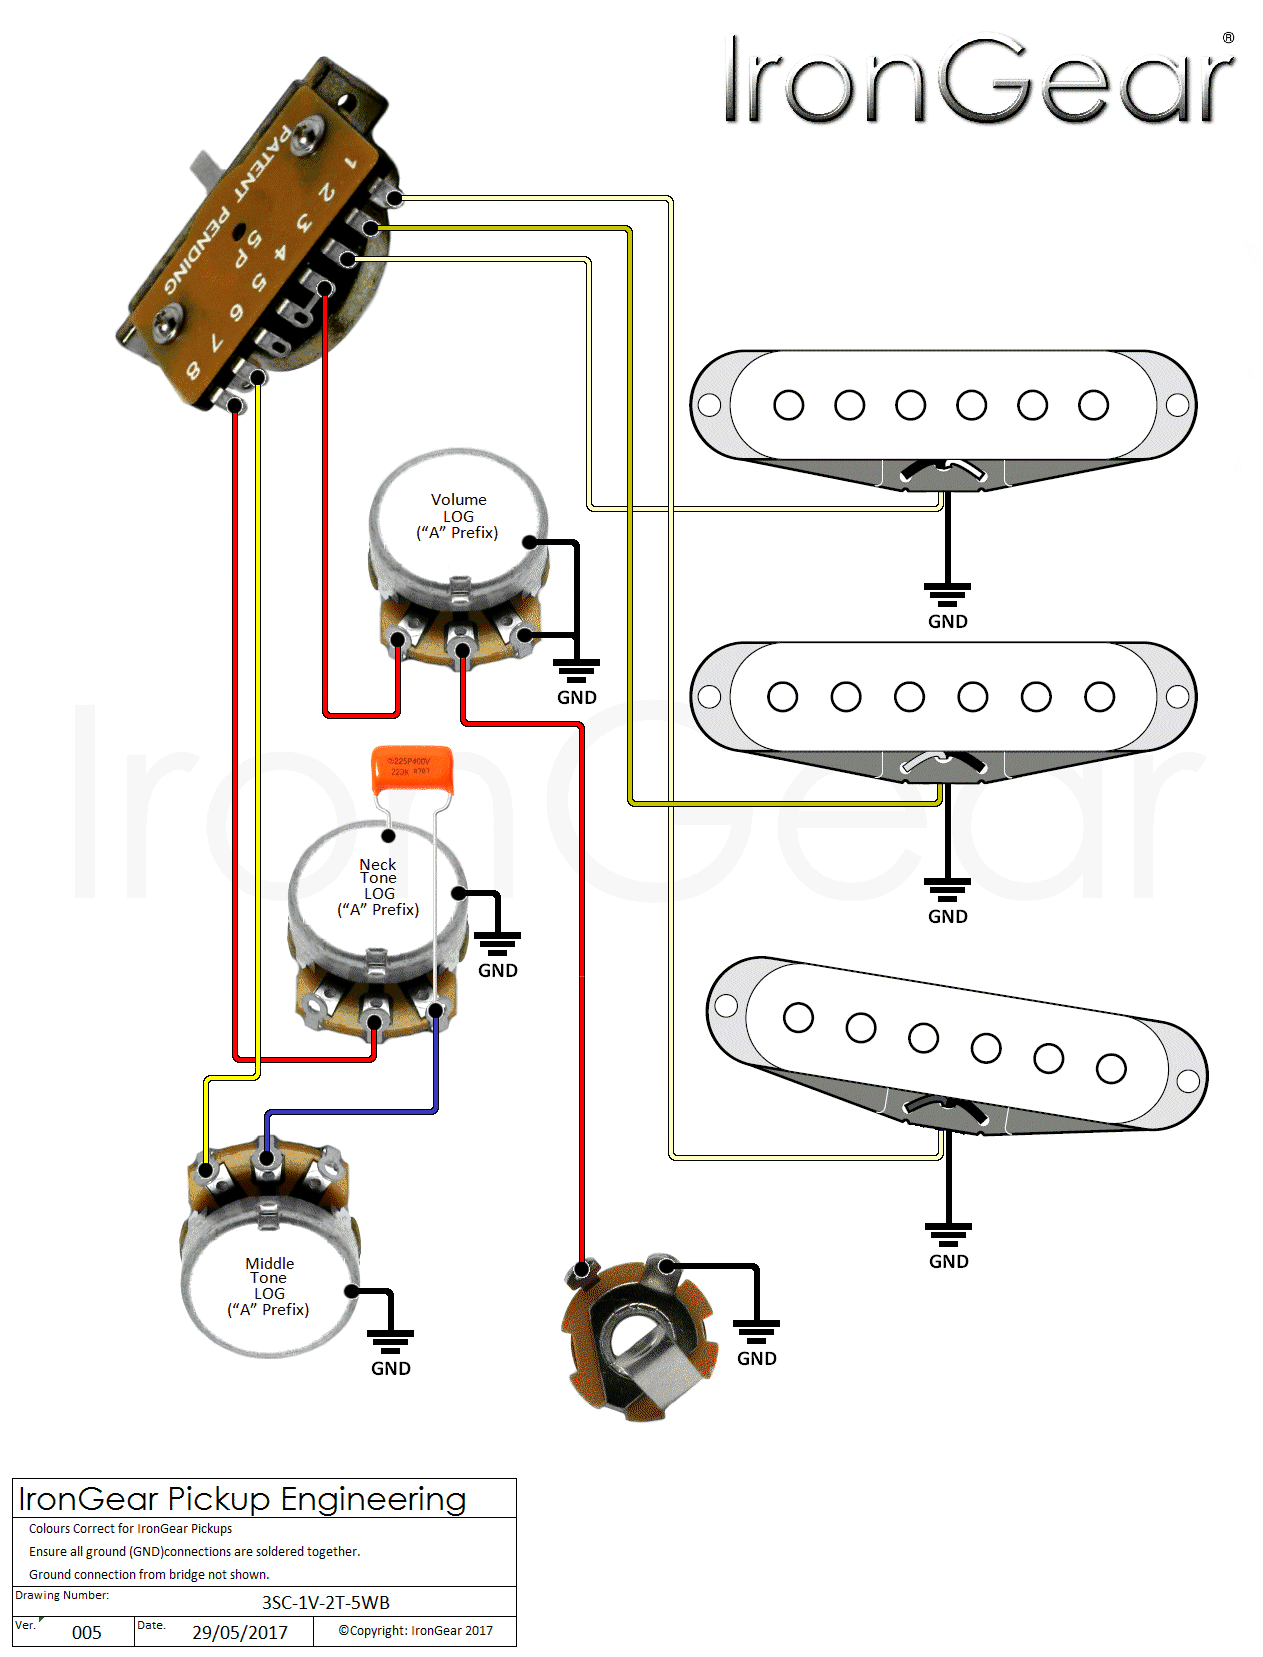 import 5 way switch wiring diagram for single coil at neck and 2 singles in series at bridge